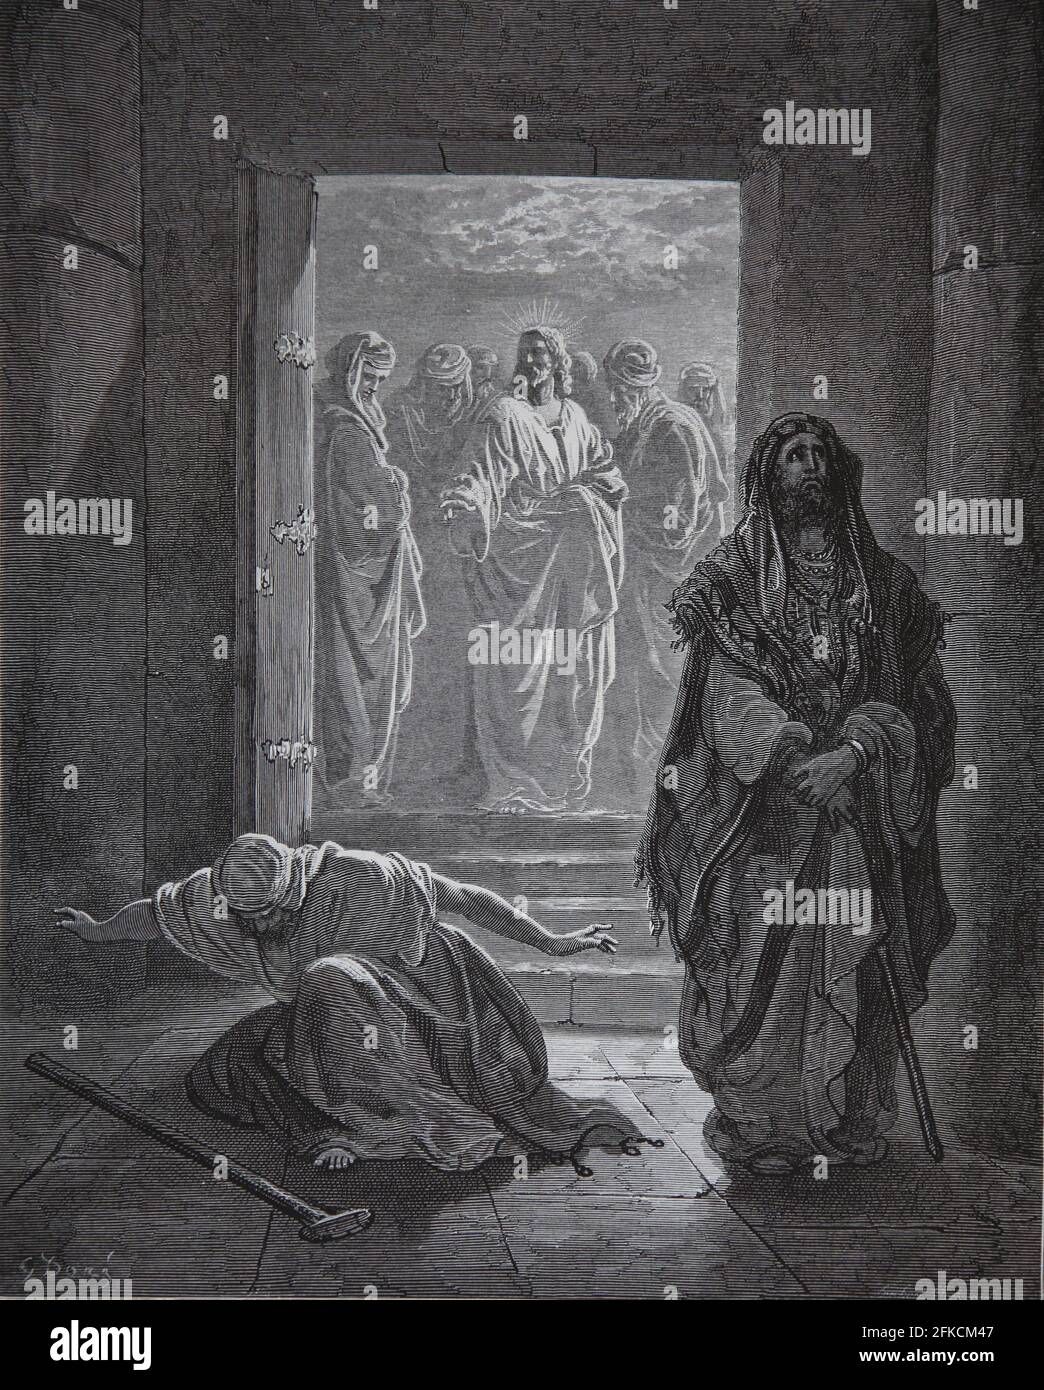 The parable of the Pharisee and the Publican. (Luke 18:11,13). Engraving. Bible Illustration by Gustave Dore. 19th century. Stock Photo